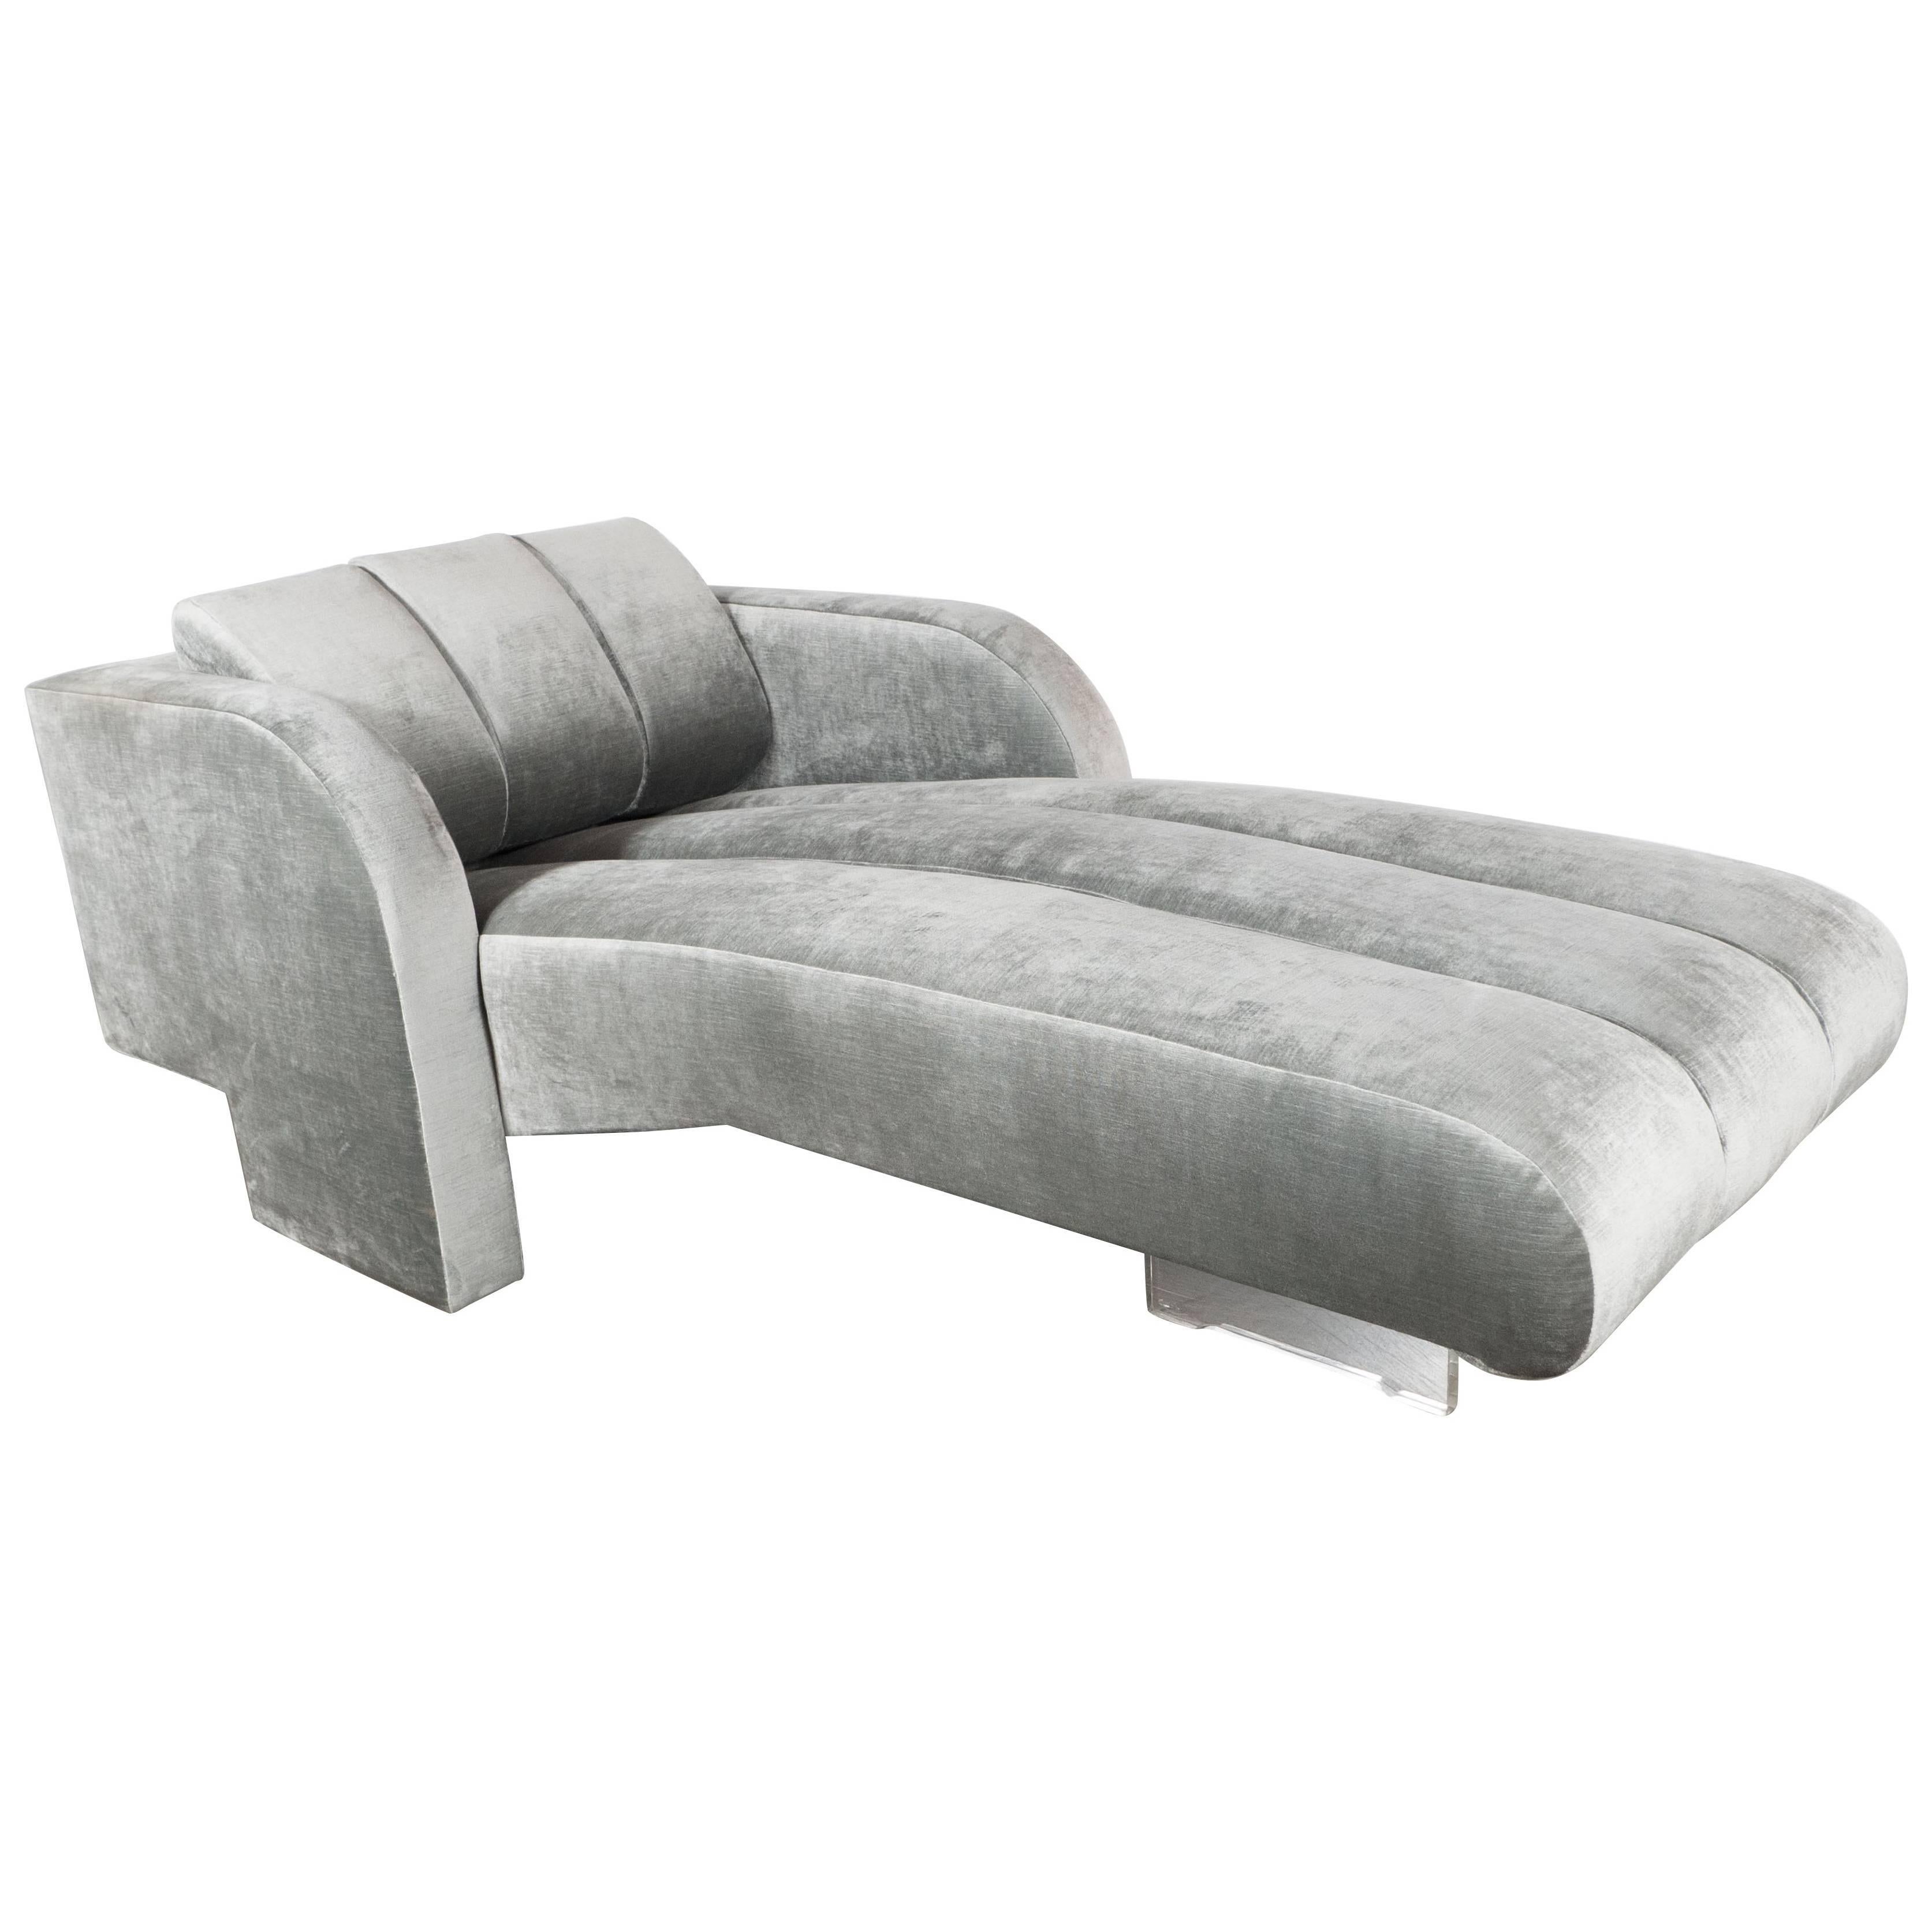 Luxe Mid-Century Velvet Chaise Longue from the Omnibus Series by Vladimir Kagan